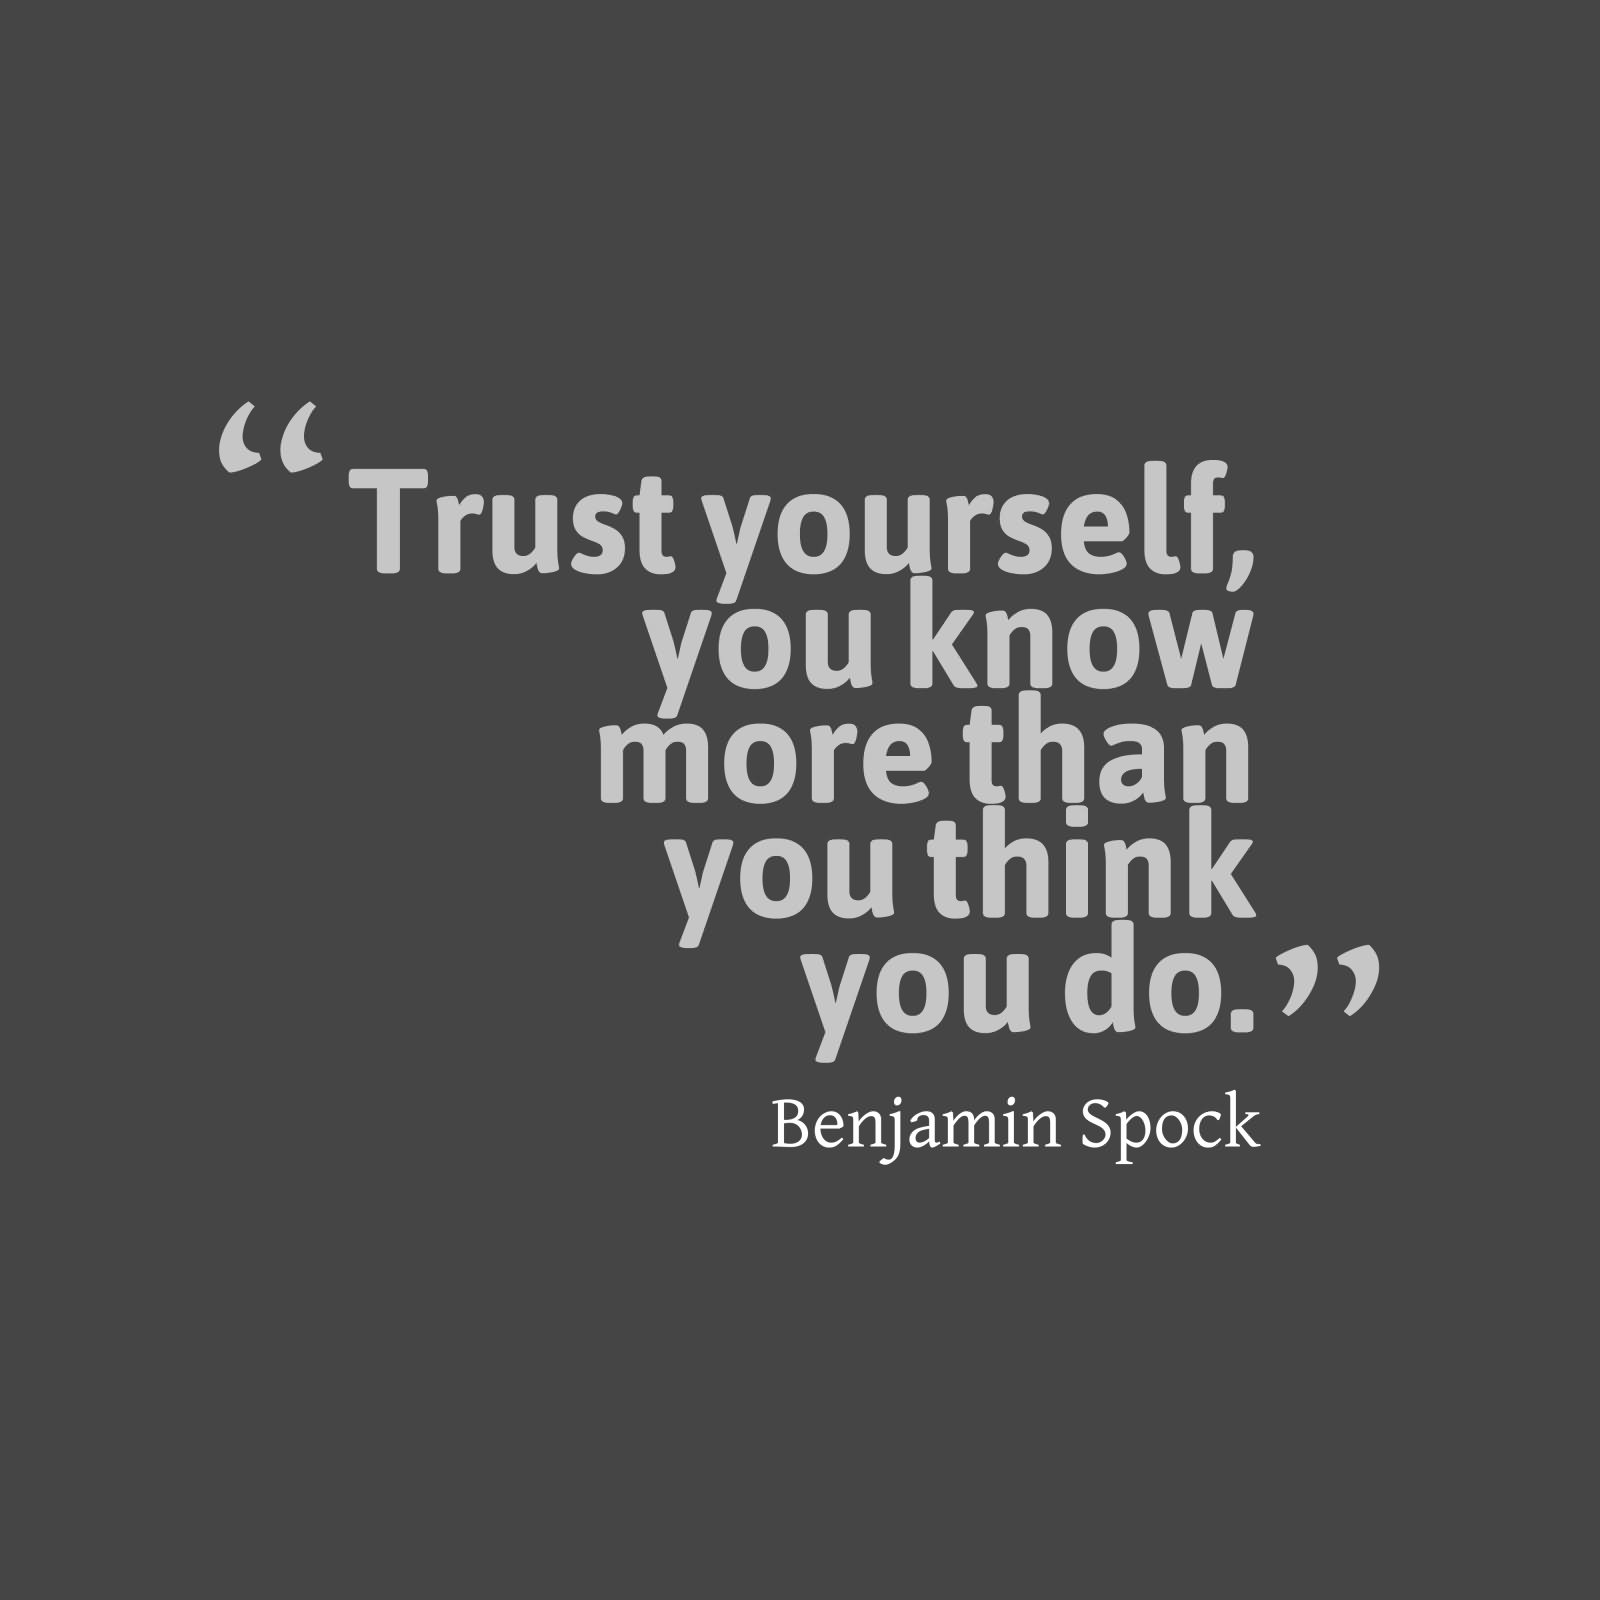 Trust yourself, you know more than you think you do  - Benjamin Spock